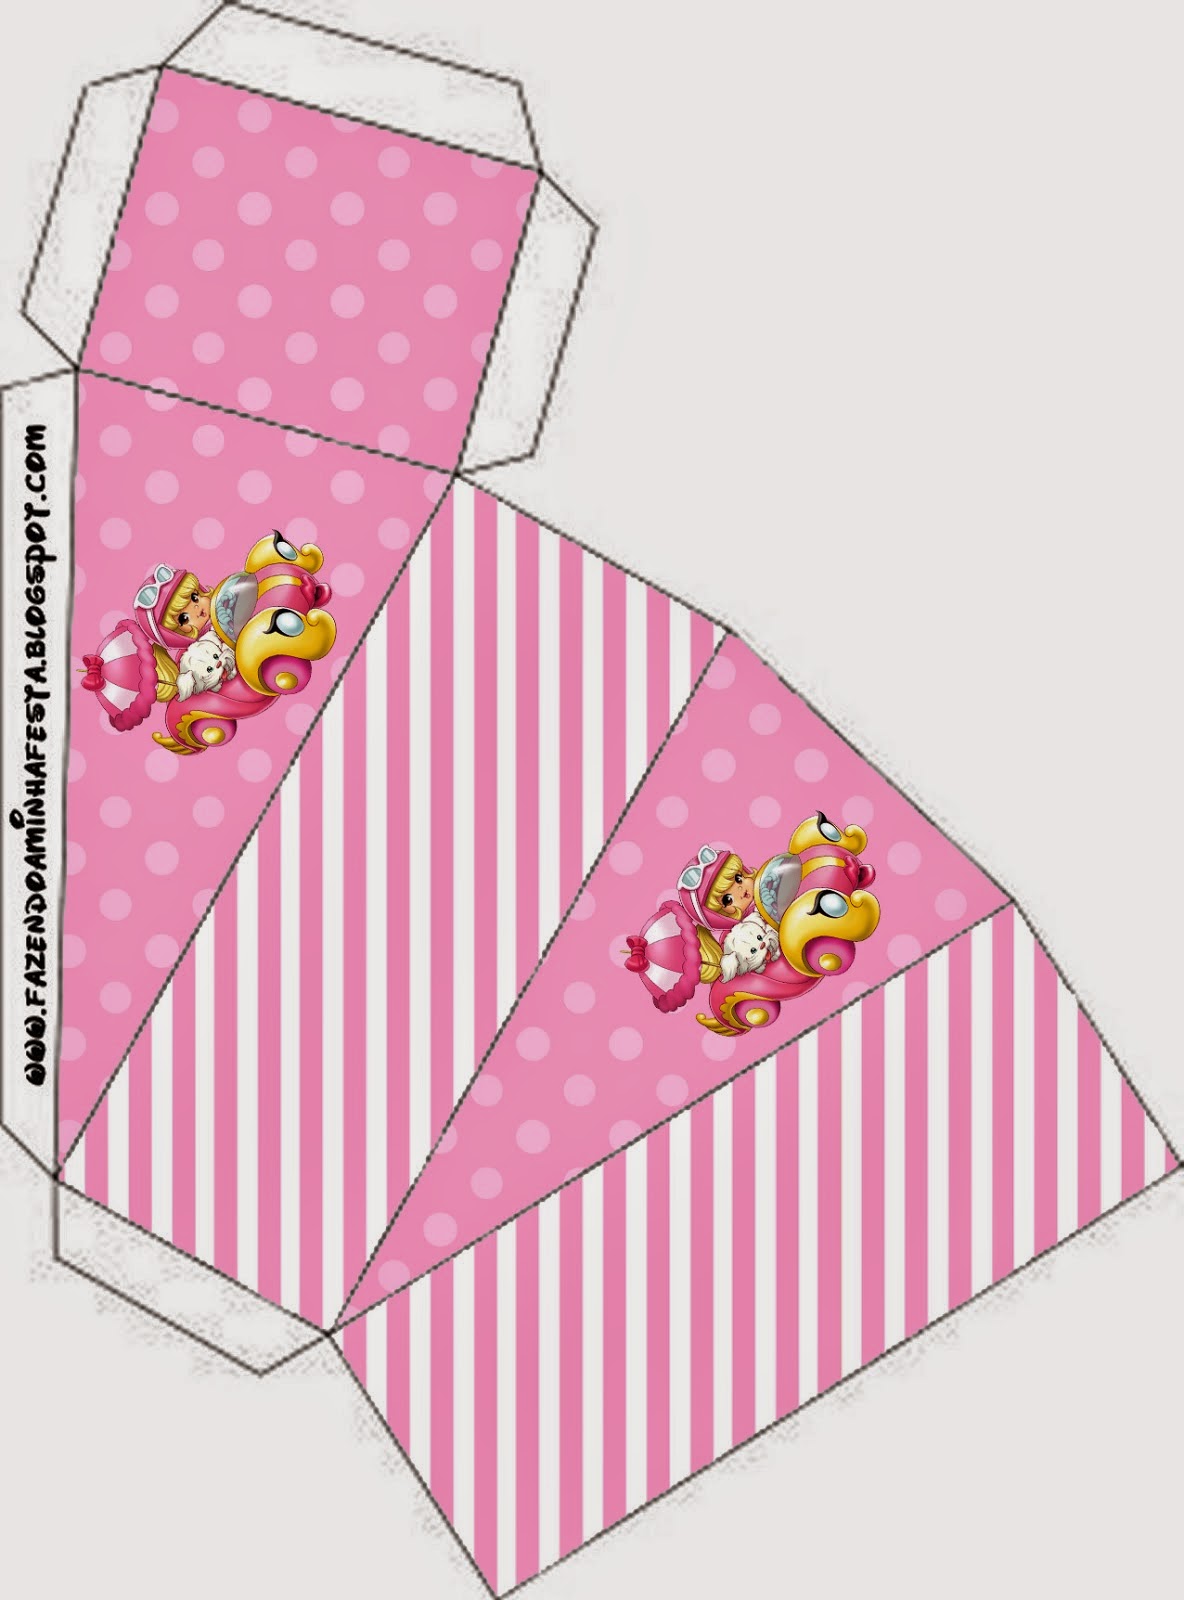 Penelope Pitstop Baby: Free Printable Boxes. - Oh My Baby!